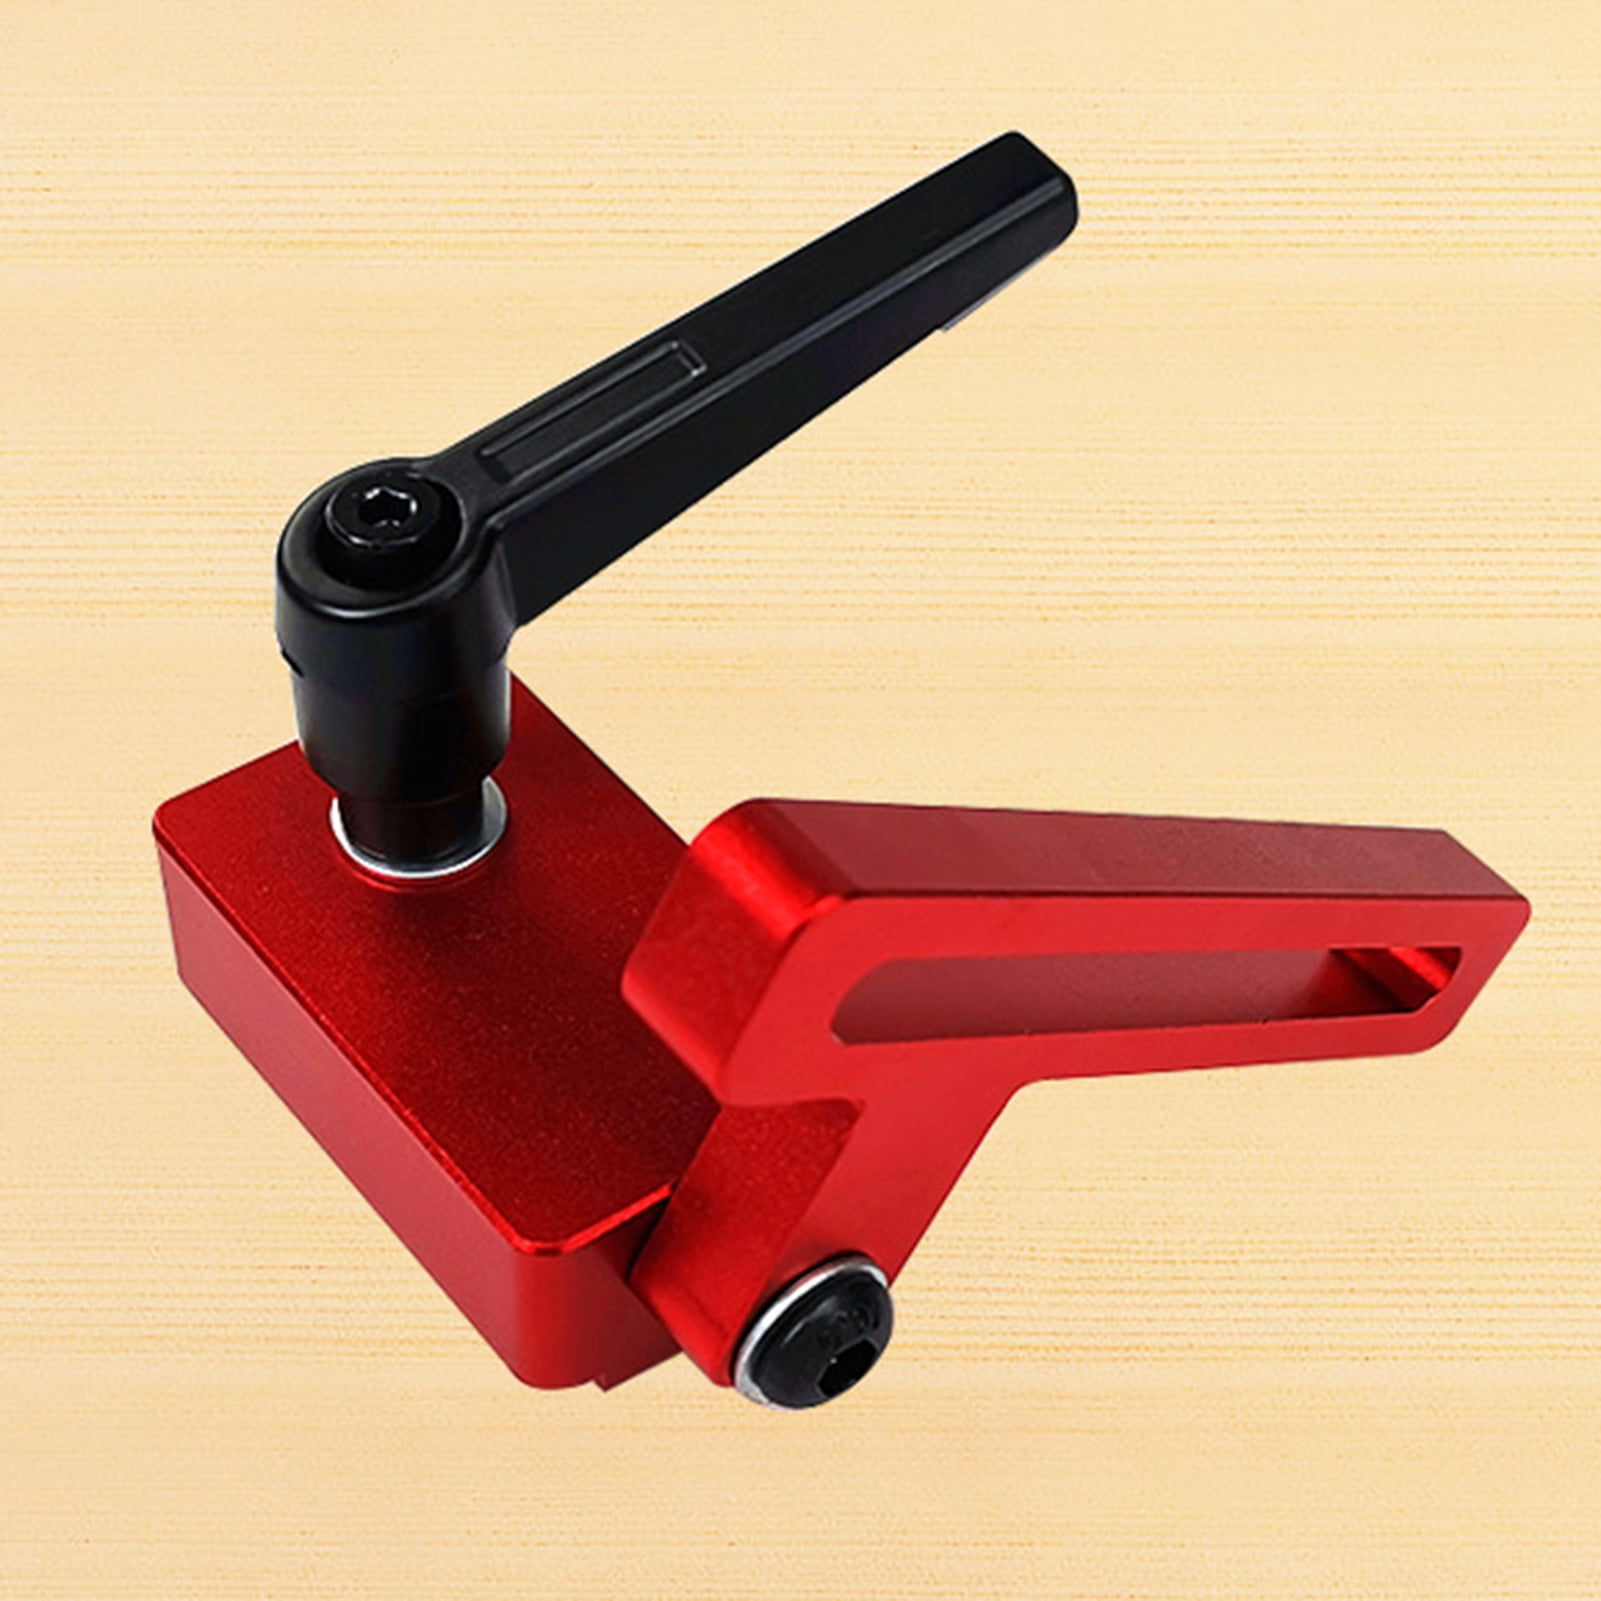 T Tracks Slot Miter Gauge Fence Connector Aluminum Alloy Woodworking Router Tool 